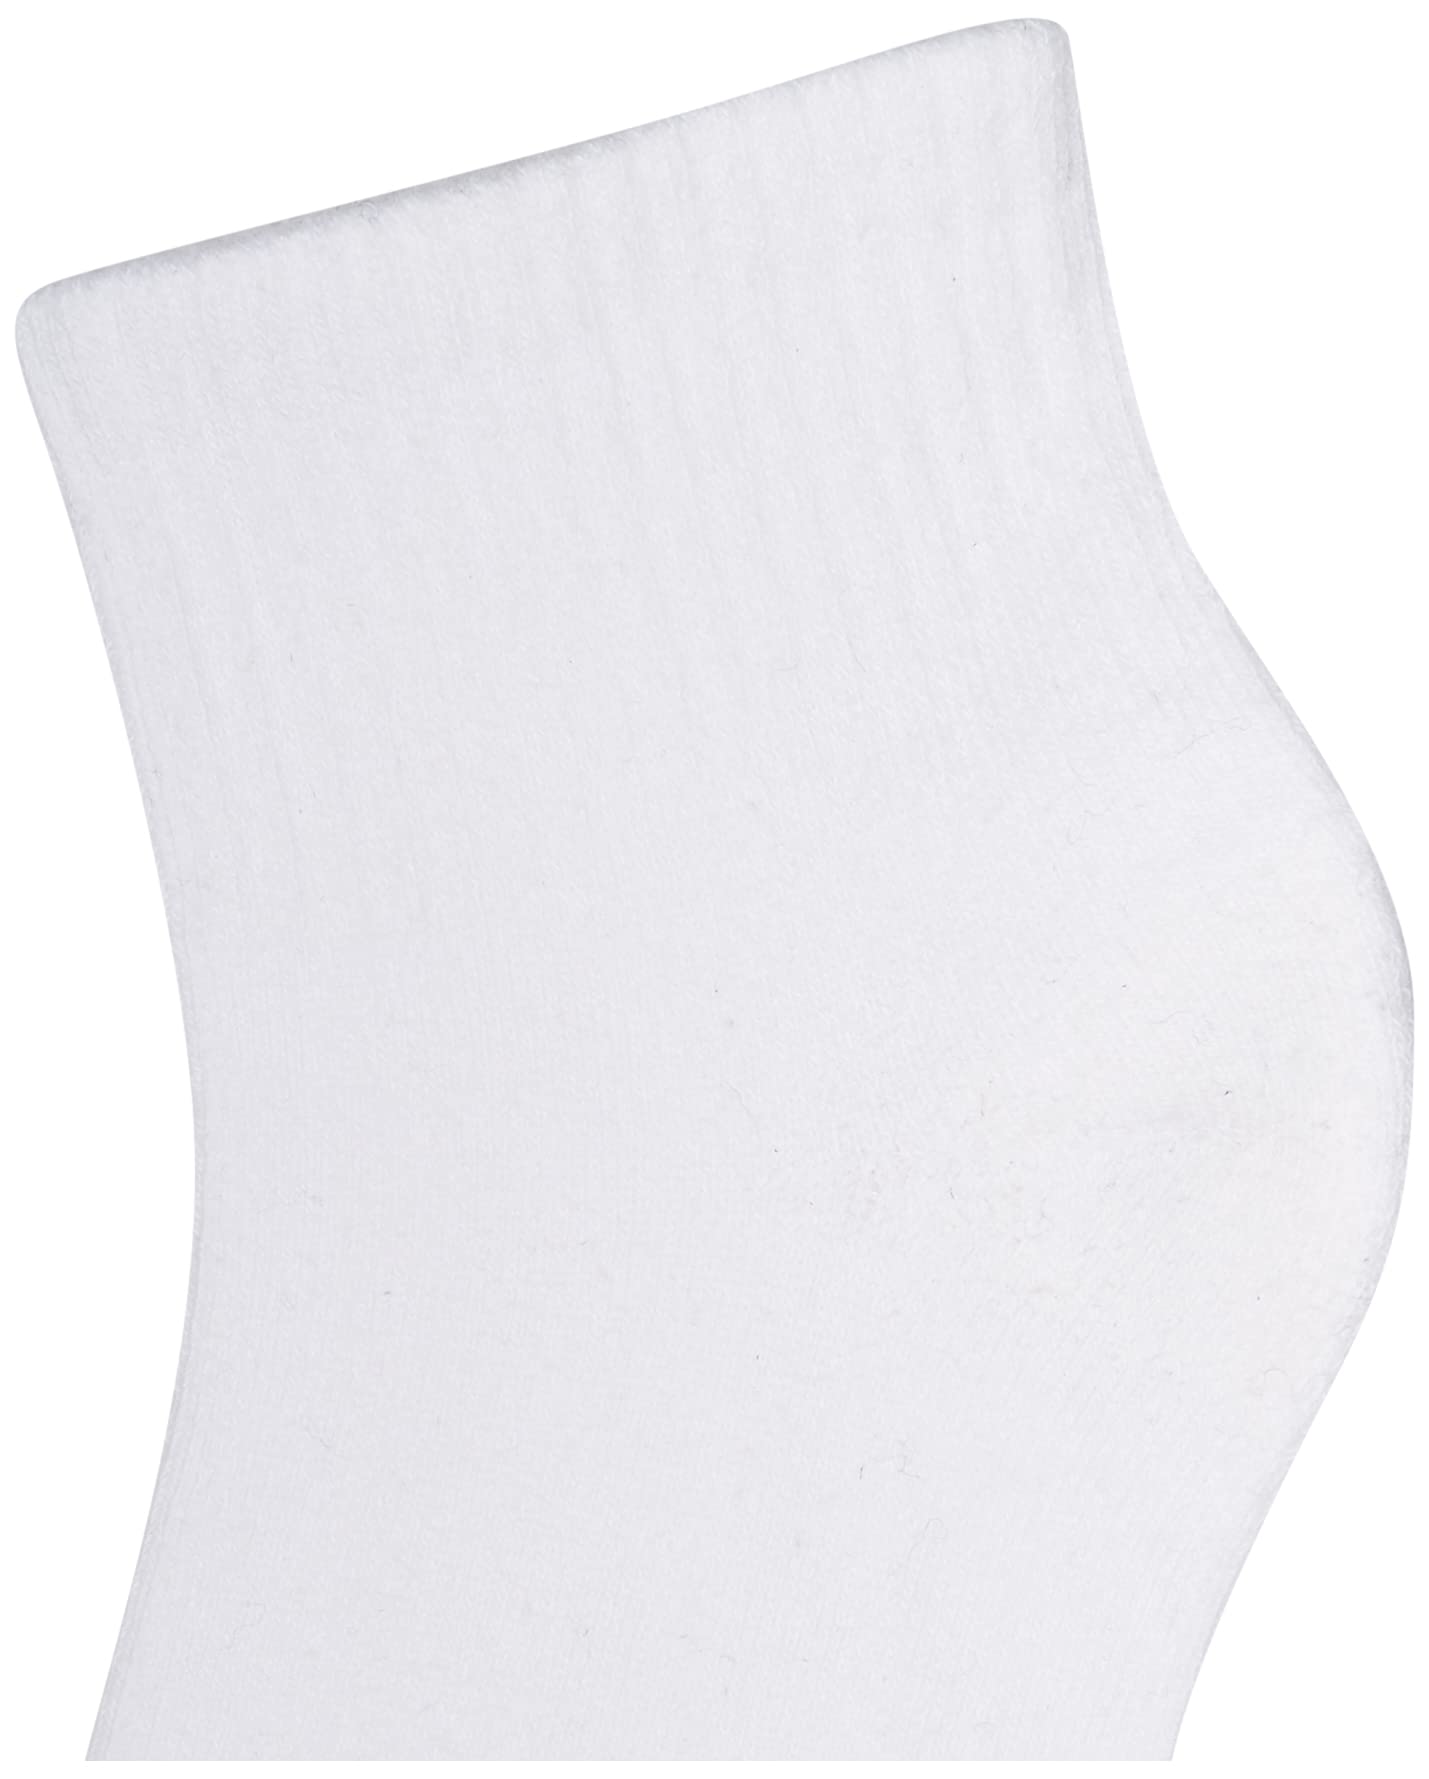 Hanes Womens Cool Comfort Toe Support Ankle Socks, 6-pair Pack